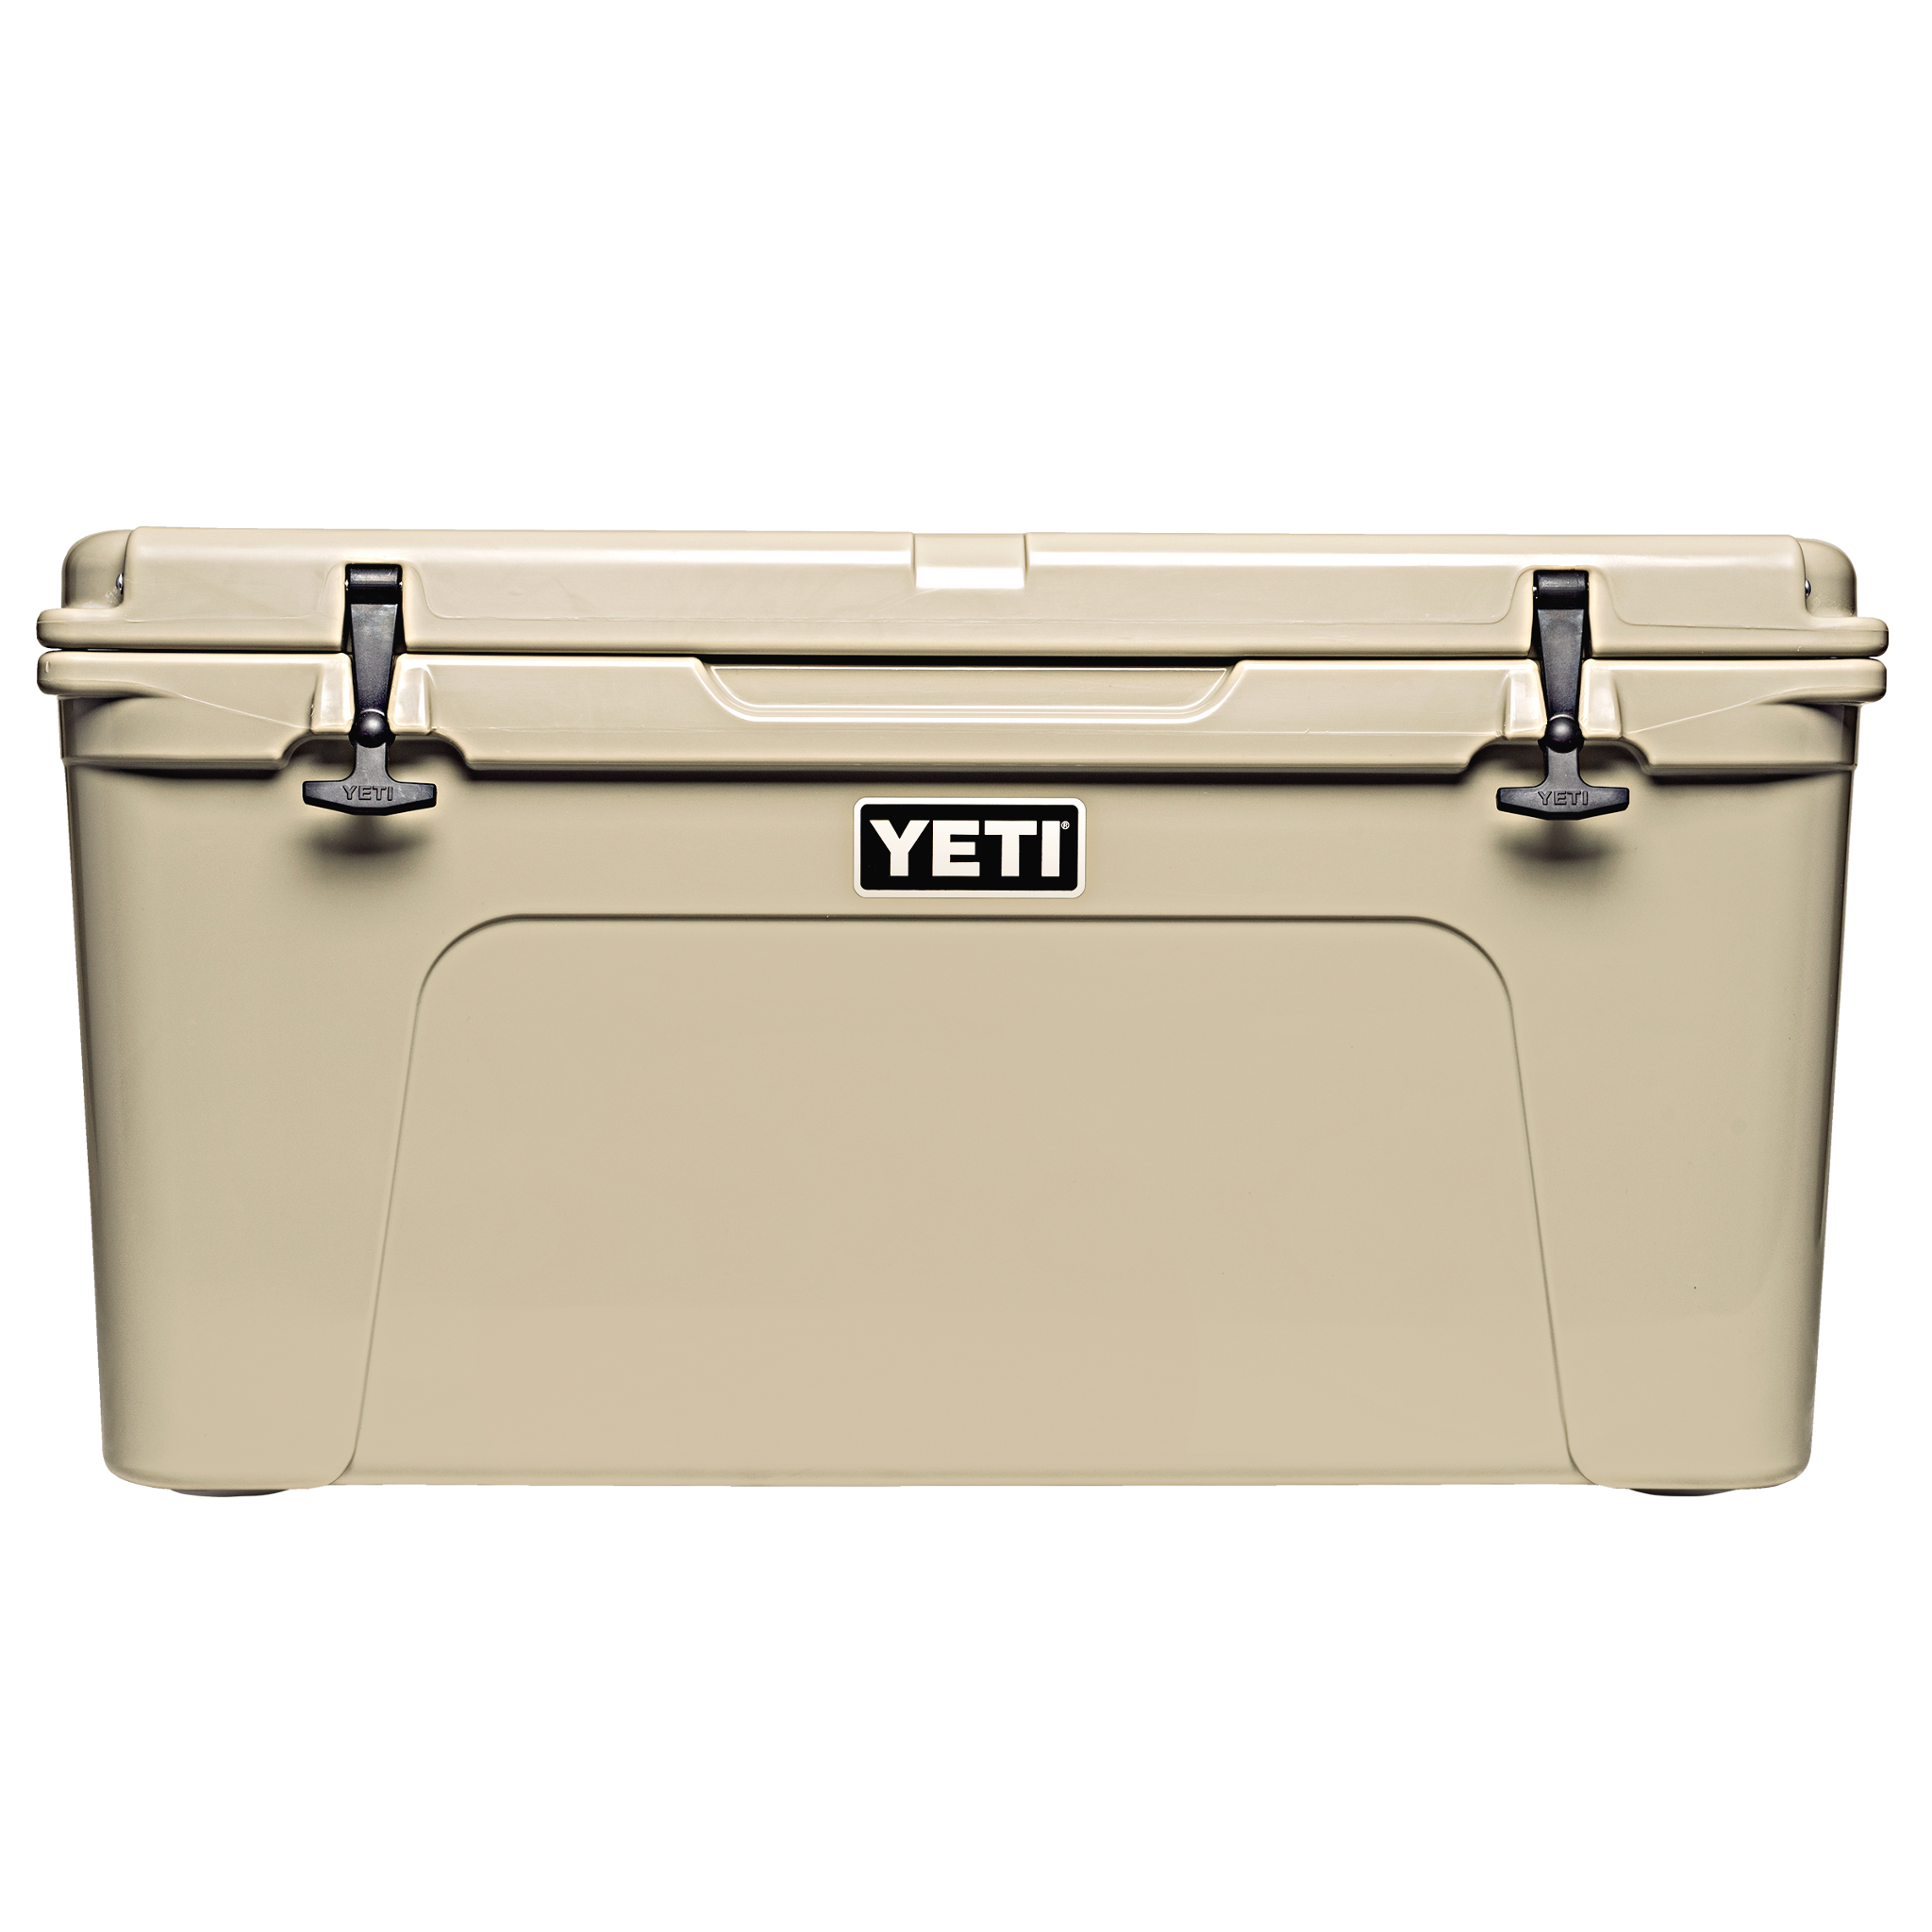 https://www.wylaco.com/image/cache/catalog/products/Greenlee%20Bargains/170545-YETI-Tundra-75-Tan-2048x2048.png